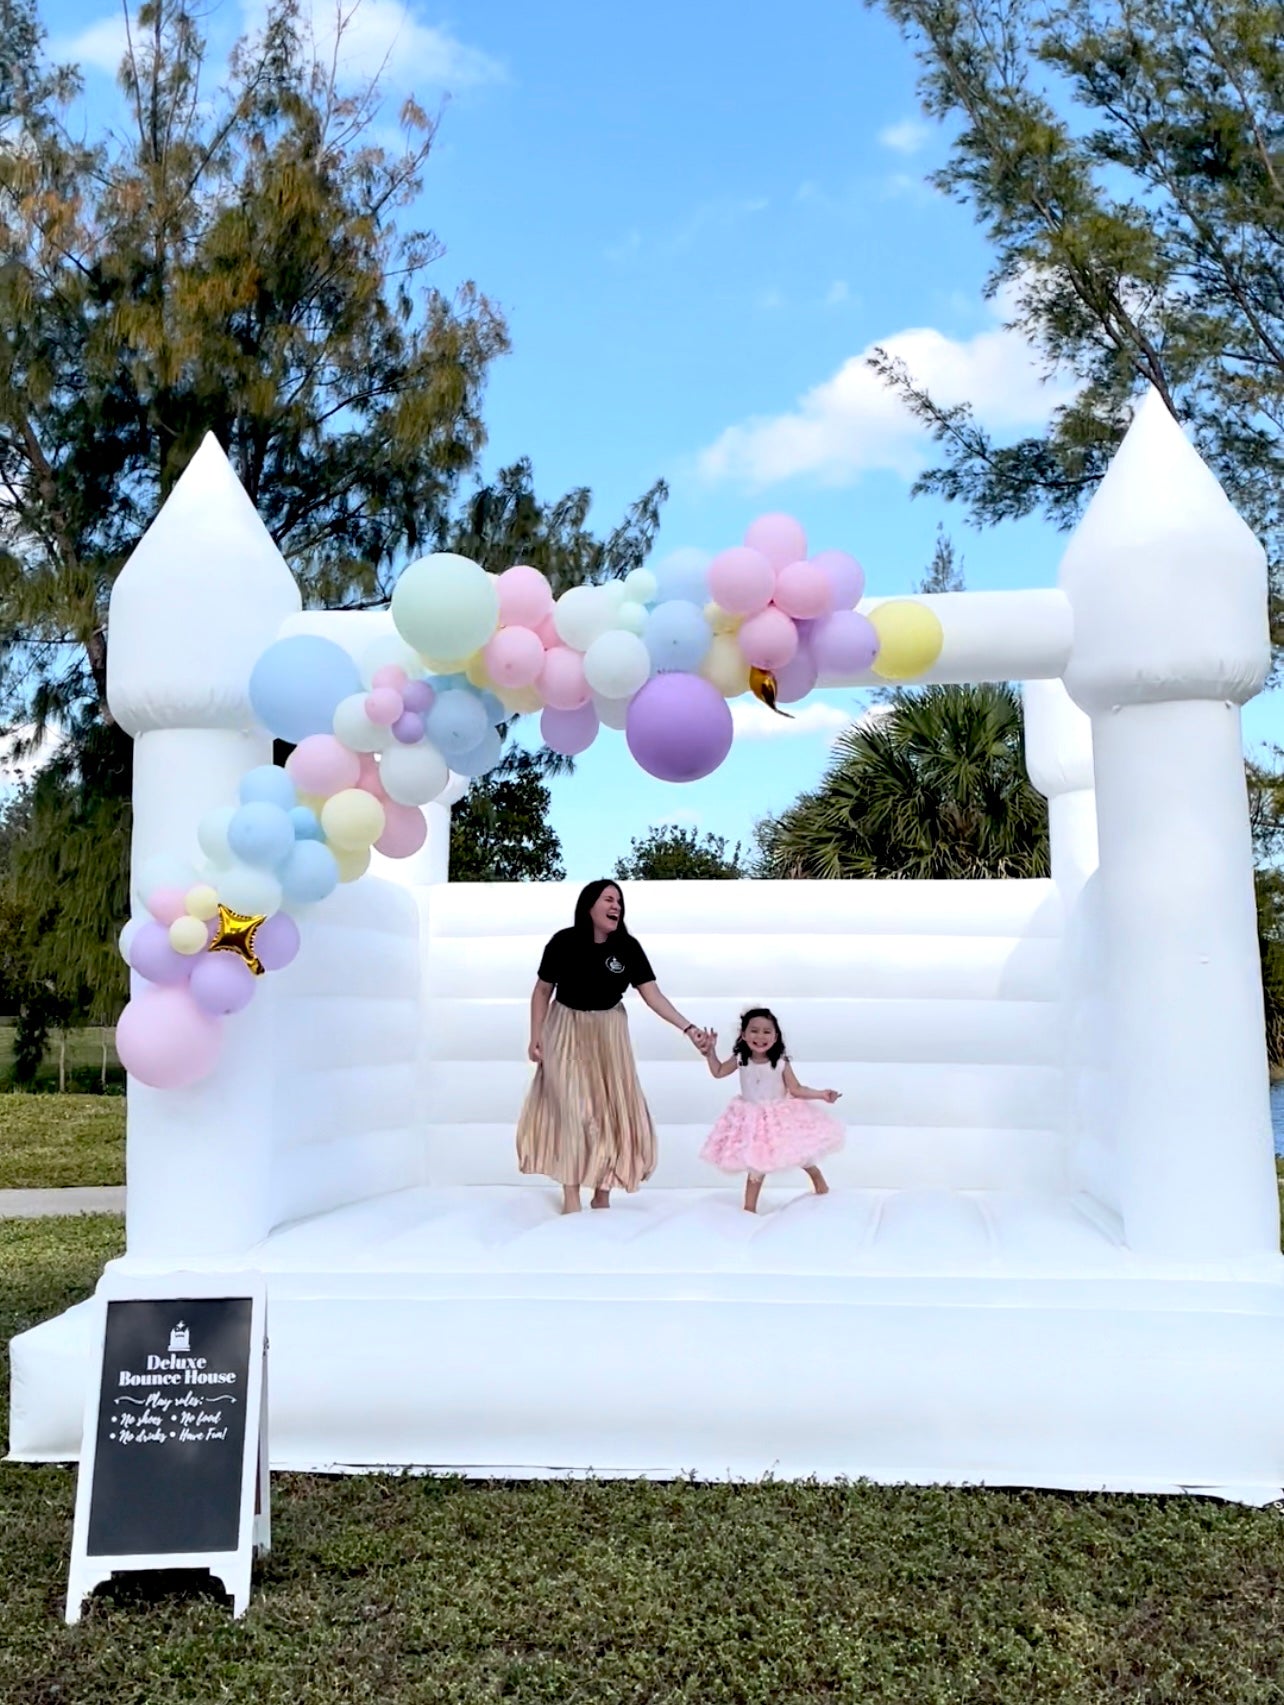 White Bounce House for rent, bounce house decor, ballon garland decor, free delivery miami dade and broward county, beautiful bounce house, castle bounce house, party decor, mom and daughter jumping, happy family, birthday with bounce house decor